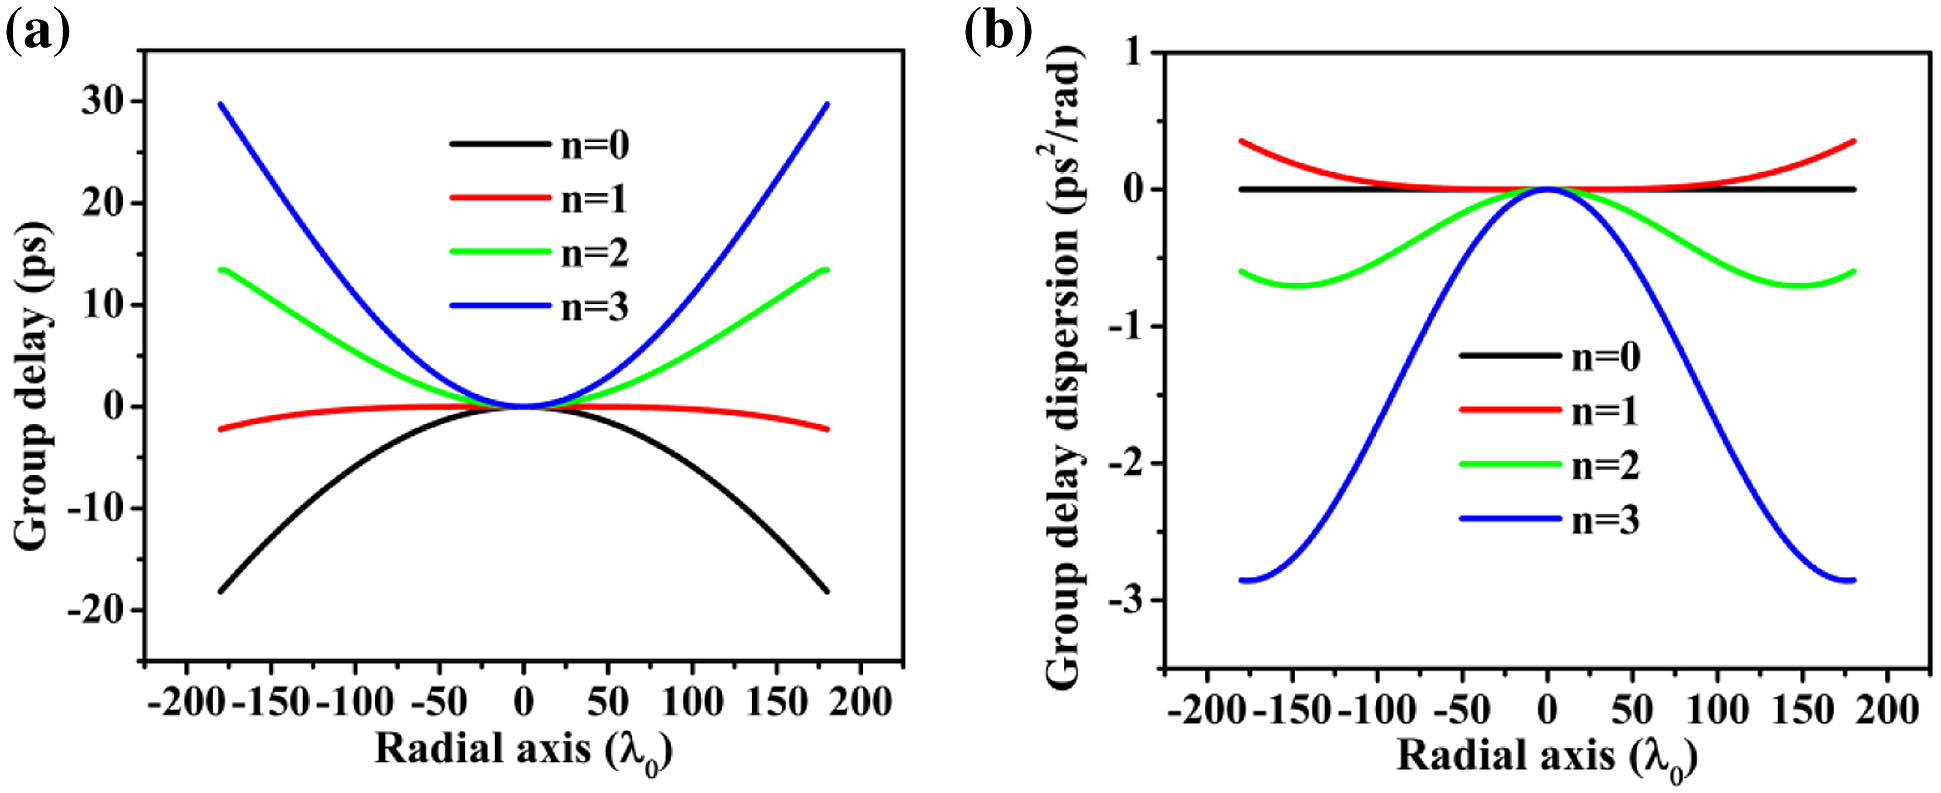 Required relative (a) group delay and (b) group delay dispersion as a function of metalenses’ coordinates for different orders (n=0, 1, 2, and 3) of dispersion engineering. All curves are plotted based on Eqs. (3) and (4) for lenses with a focal length of 330λ0 at the designed wavelength and a radius of 180λ0.